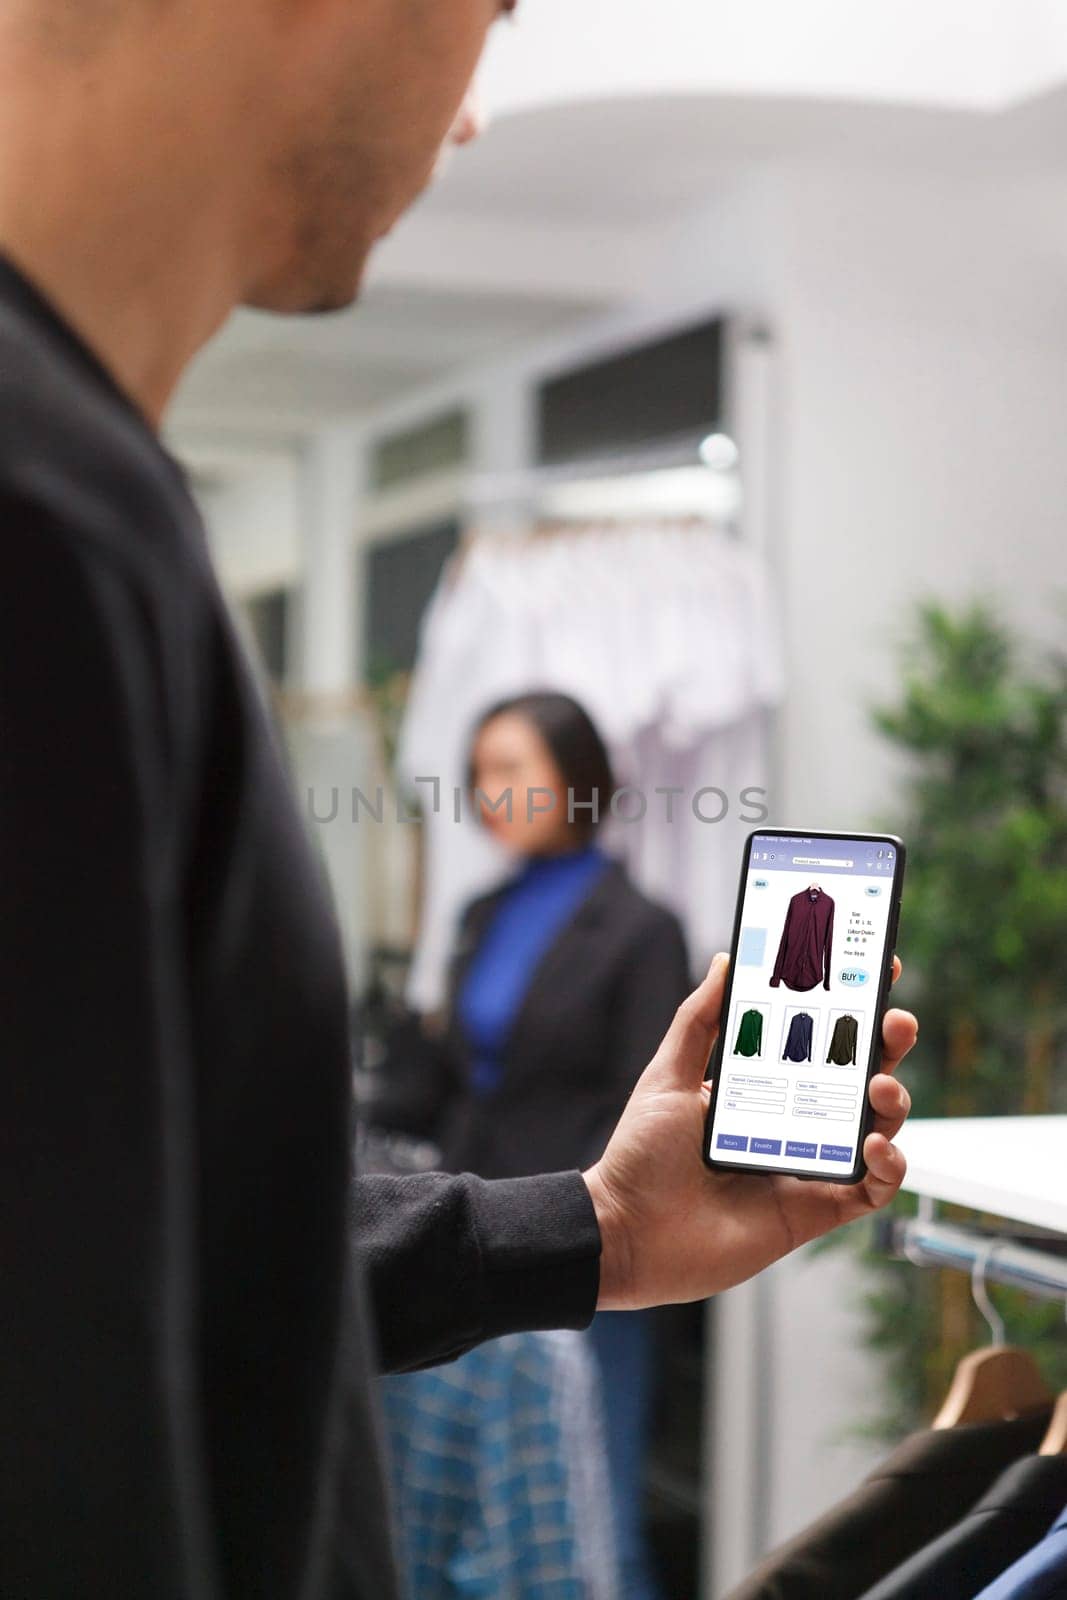 Clothing store customer male hand grasping smartphone and checking apparel on boutique website. Caucasian client using mobile device for browsing clothing items in a shopping mall.